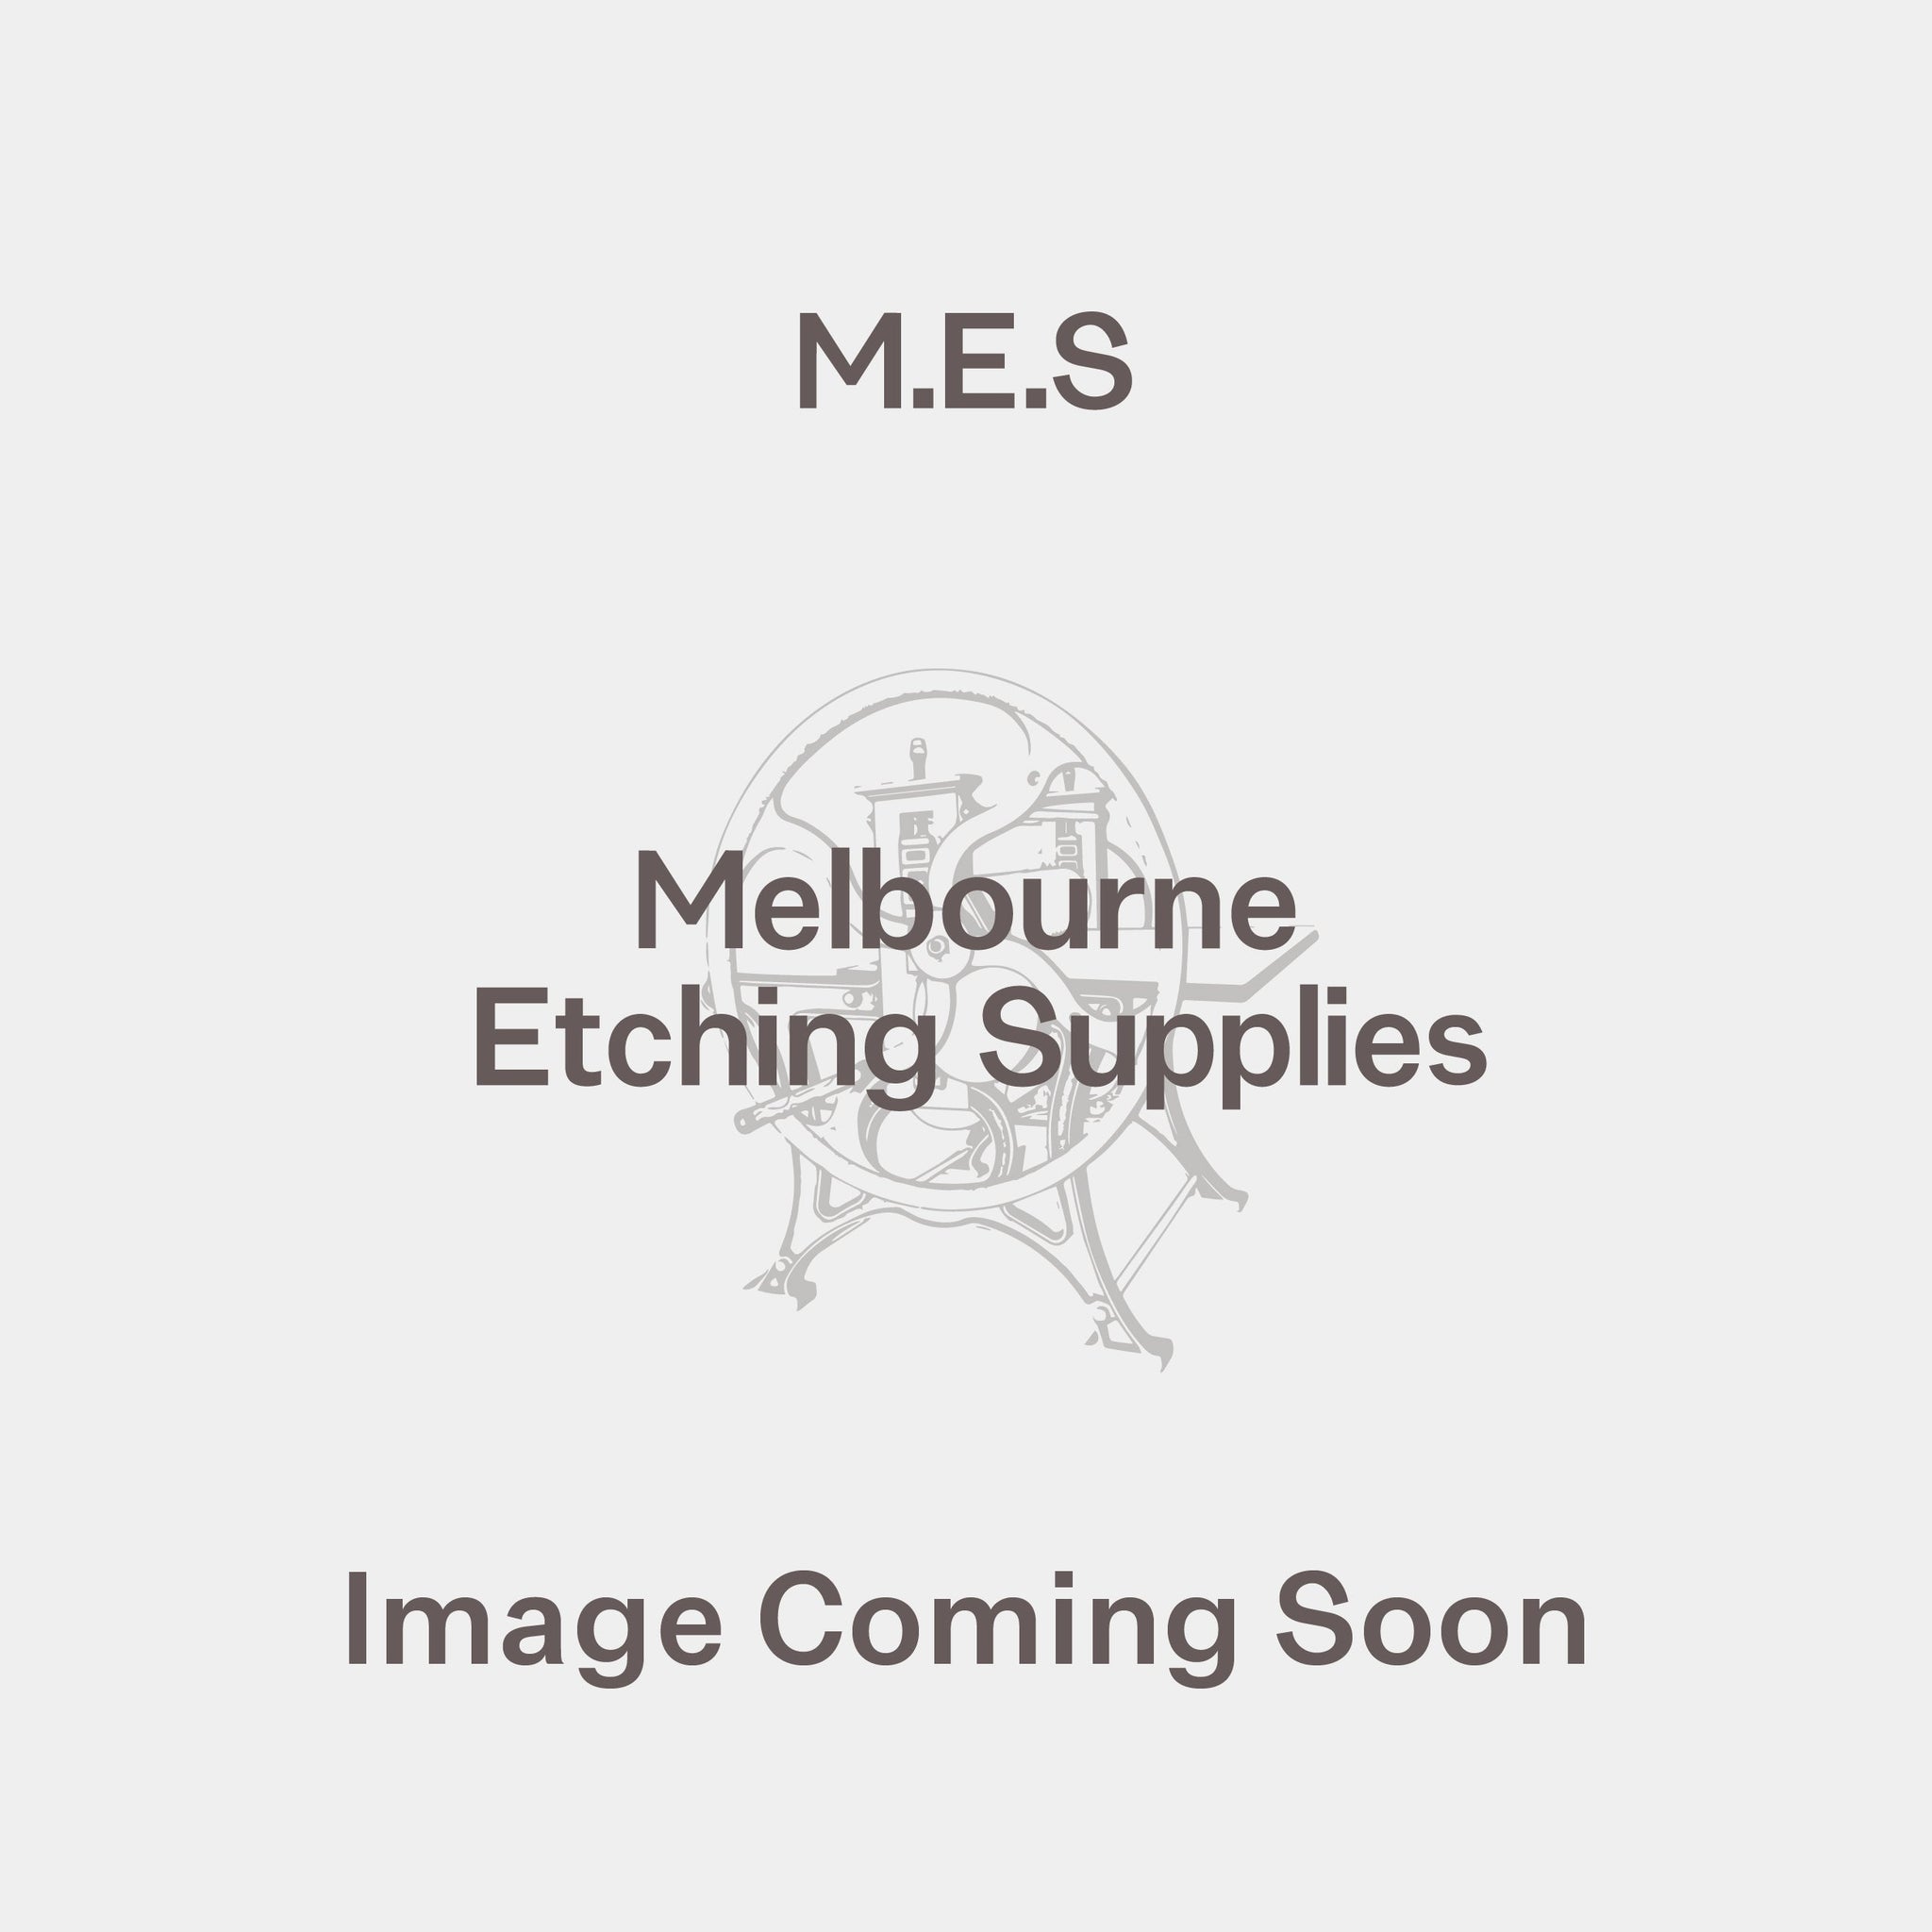 Tracing Paper 112gsm 60x84cm - Melbourne Etching Supplies